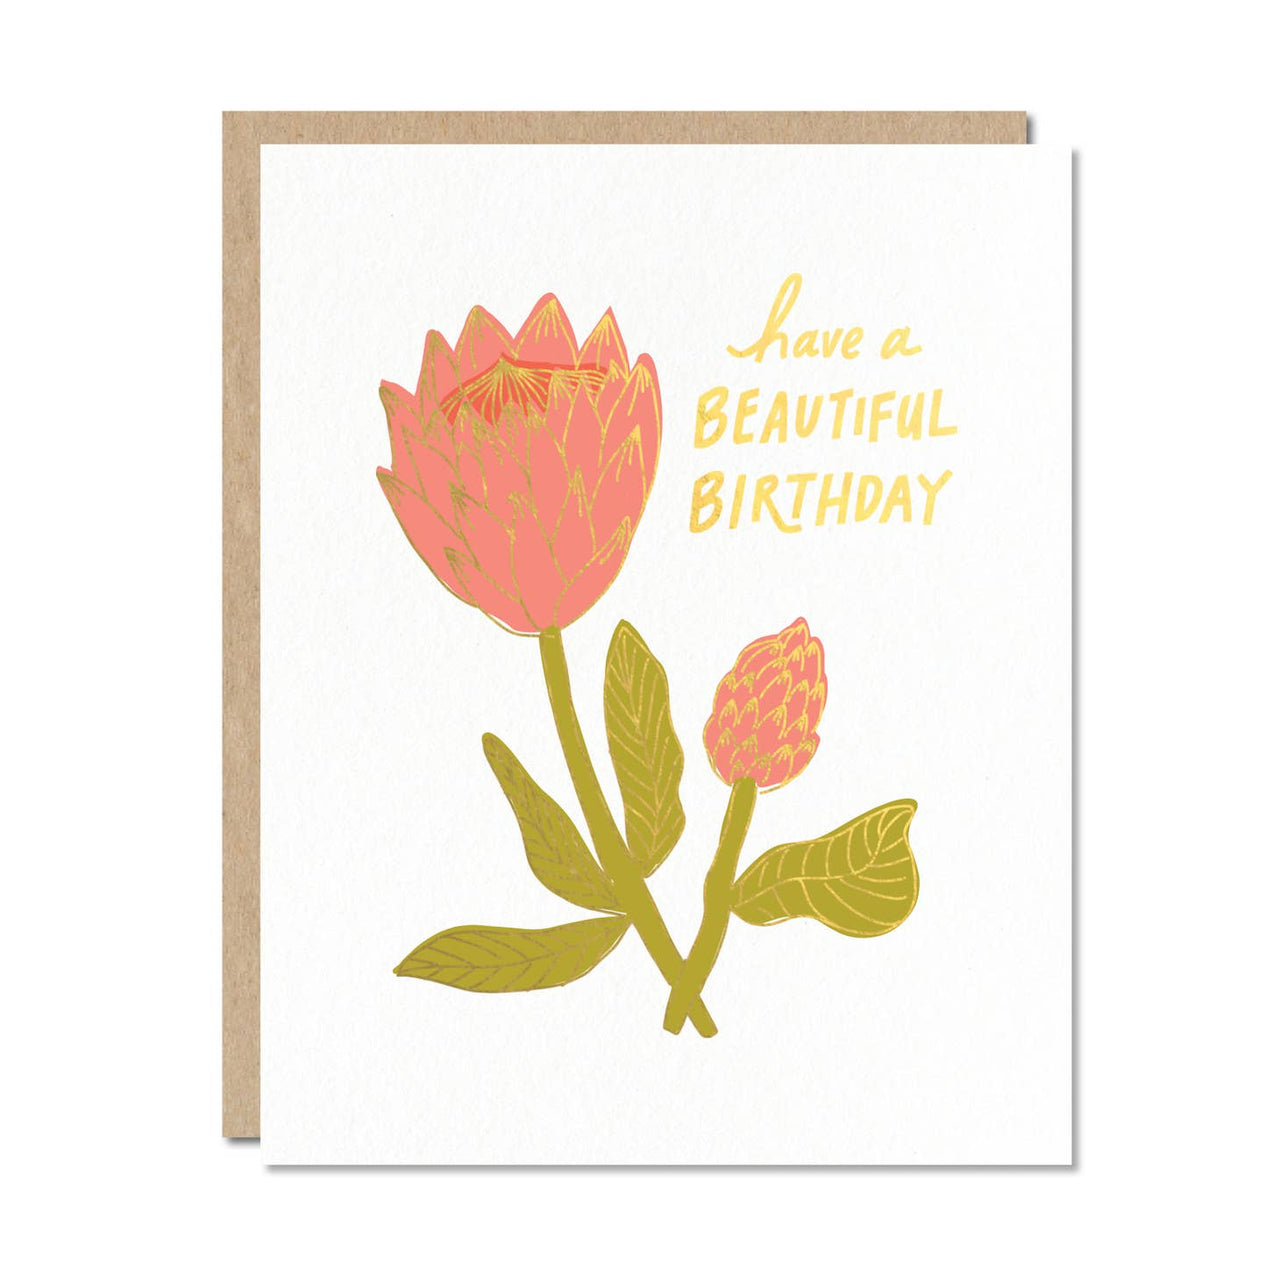 Odd Daughter - Have a Beautiful Birthday Greeting Card